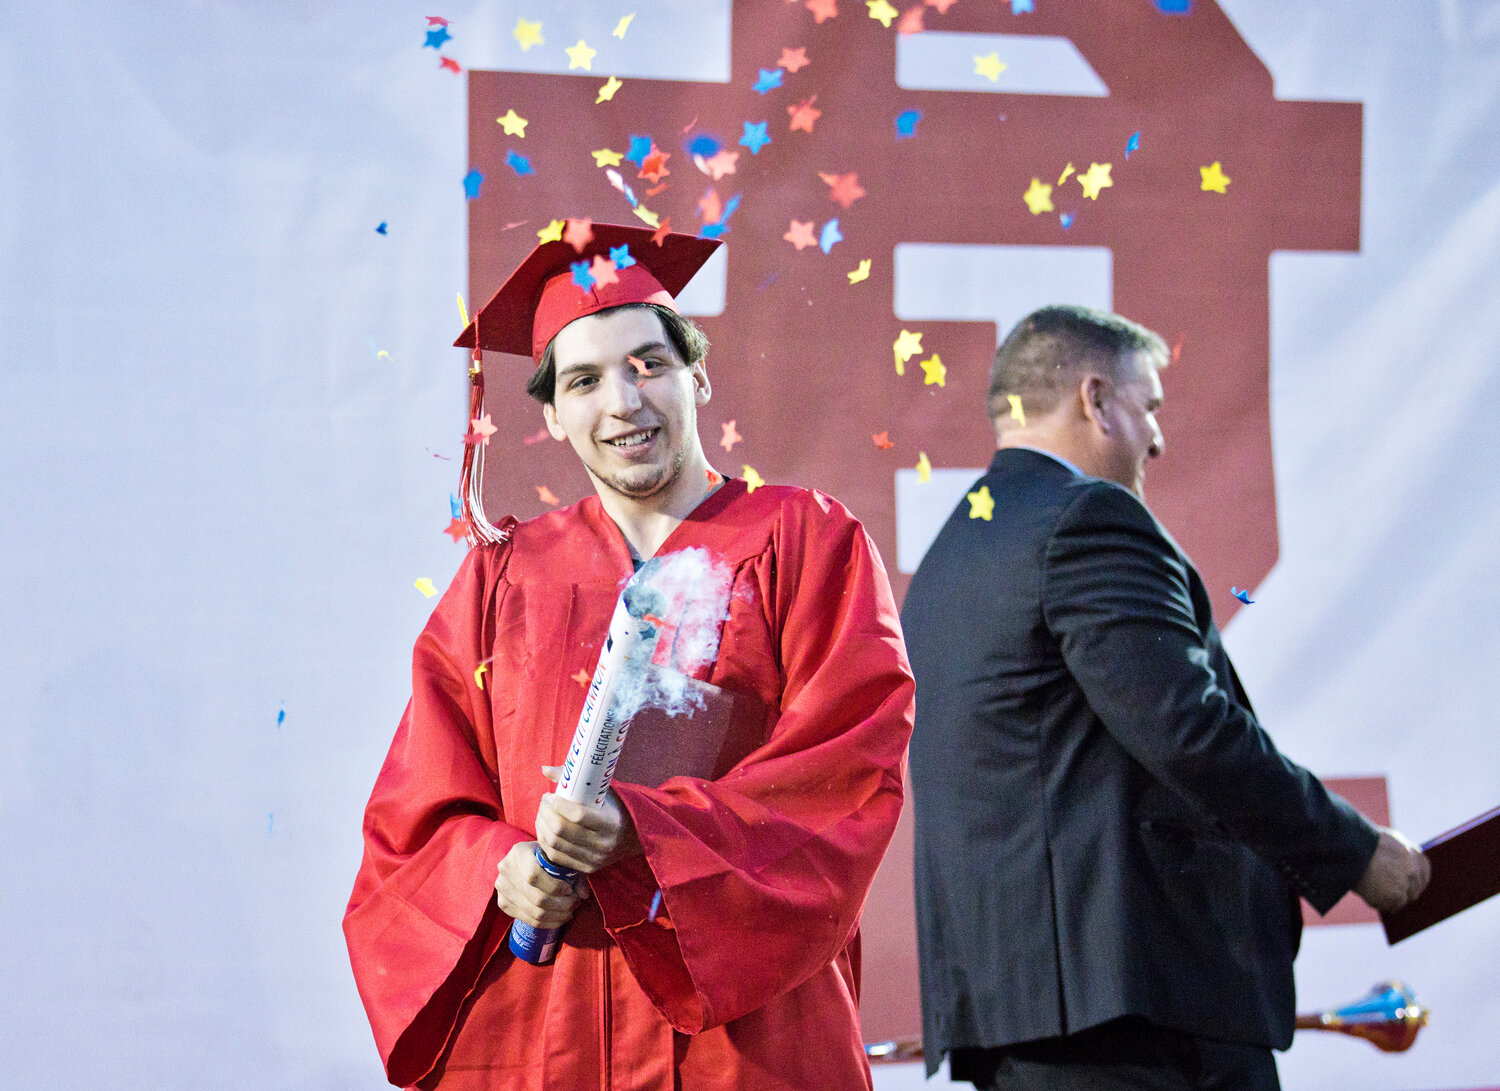 Taylor Sousa fires off a party popper after receiving his diploma.